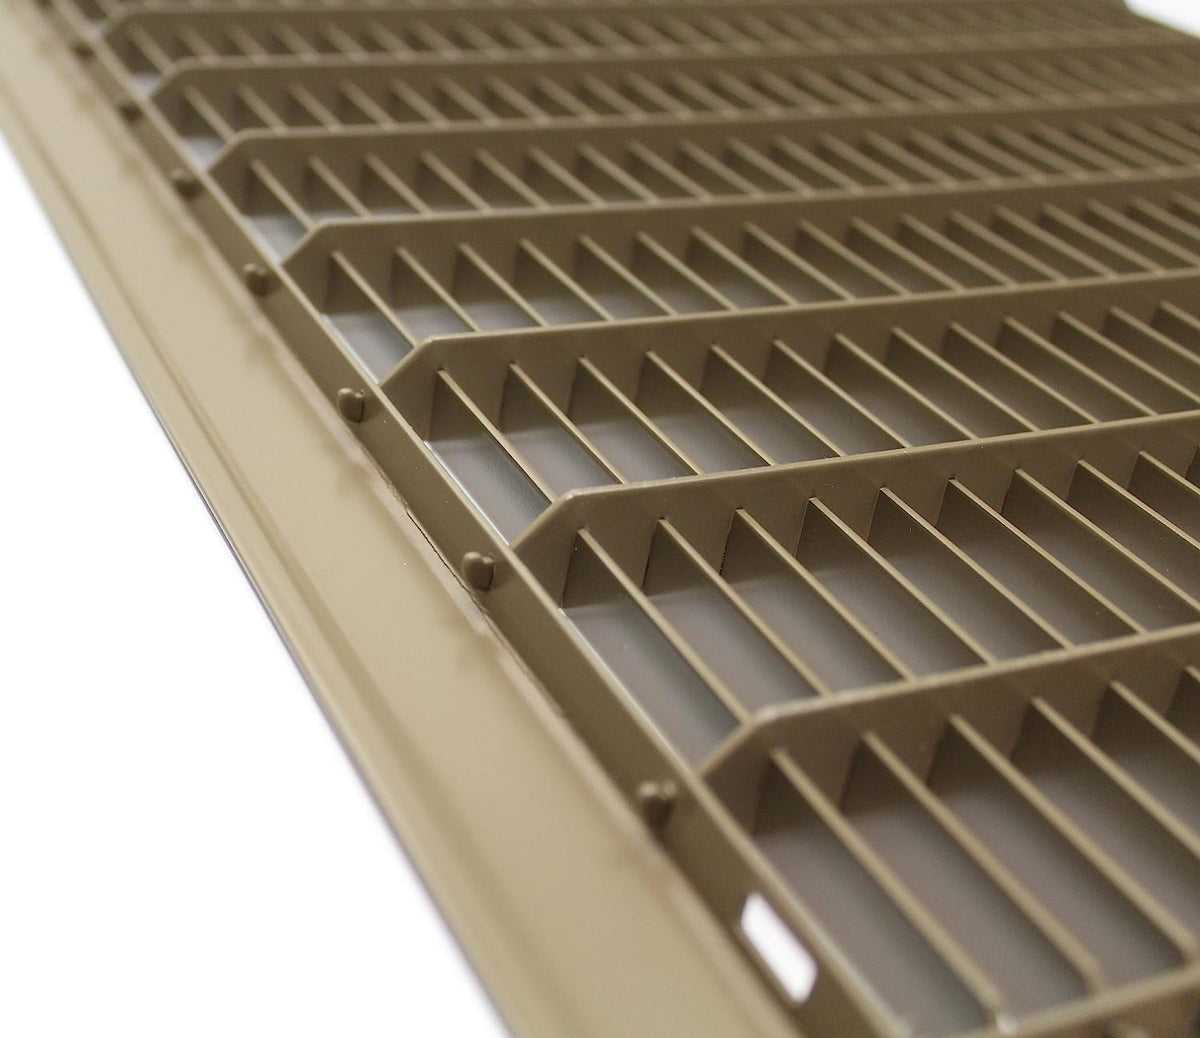 20&quot; X 25&quot; Or 25&quot; X 20&quot; Heavy Duty Floor Grille - Fixed Blades Air Grille - Brown [Outer Dimensions: 21.75 X 26.75]